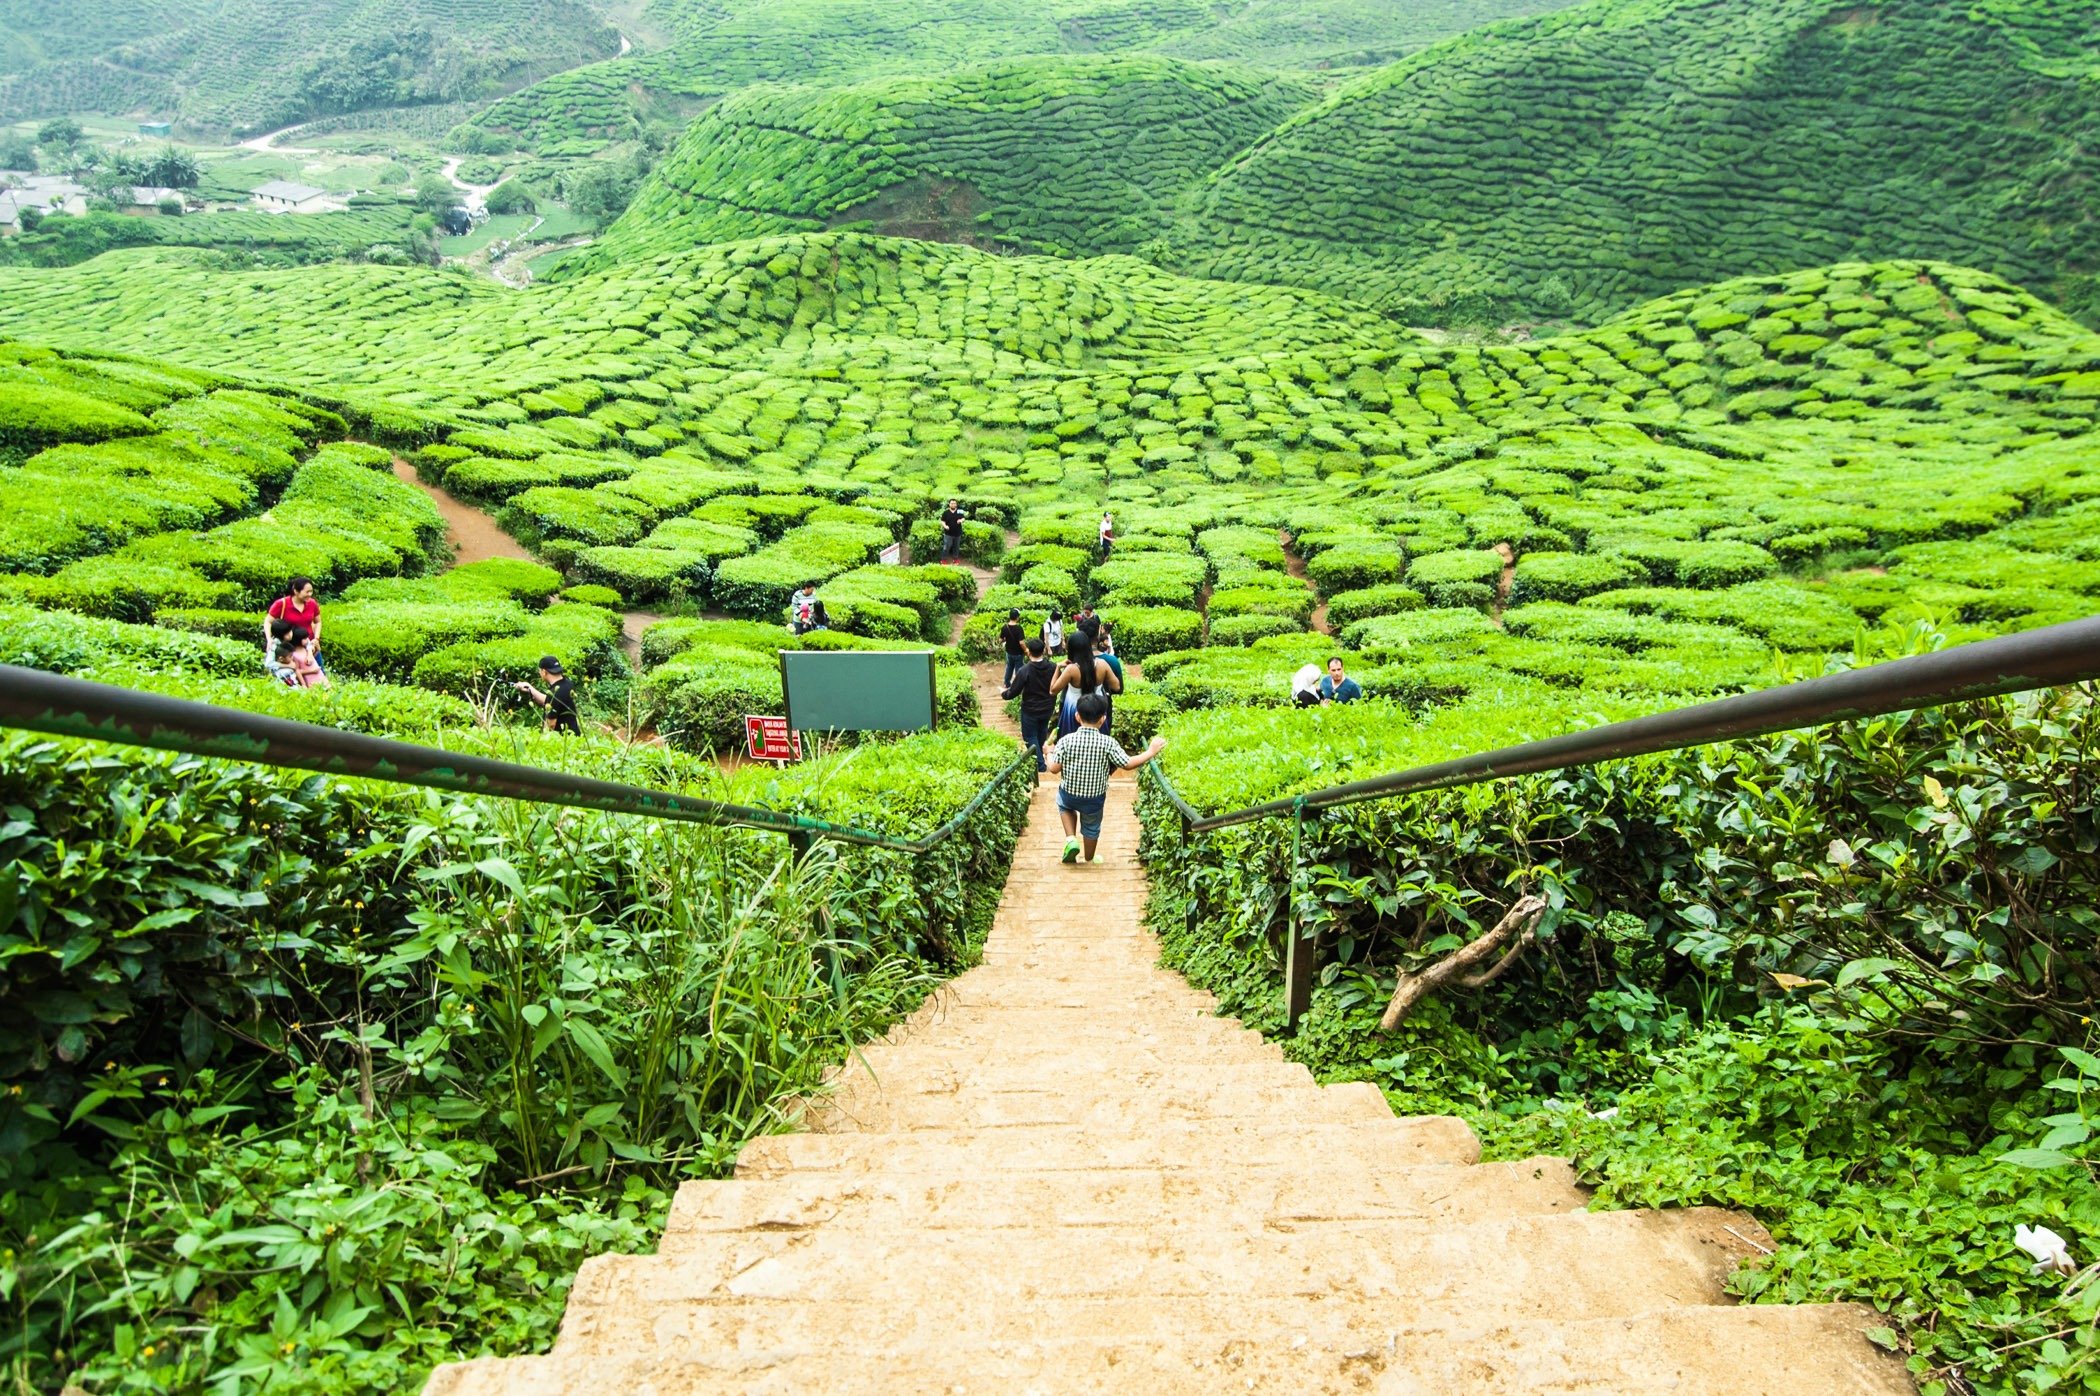 cameron highlands day tour from kl